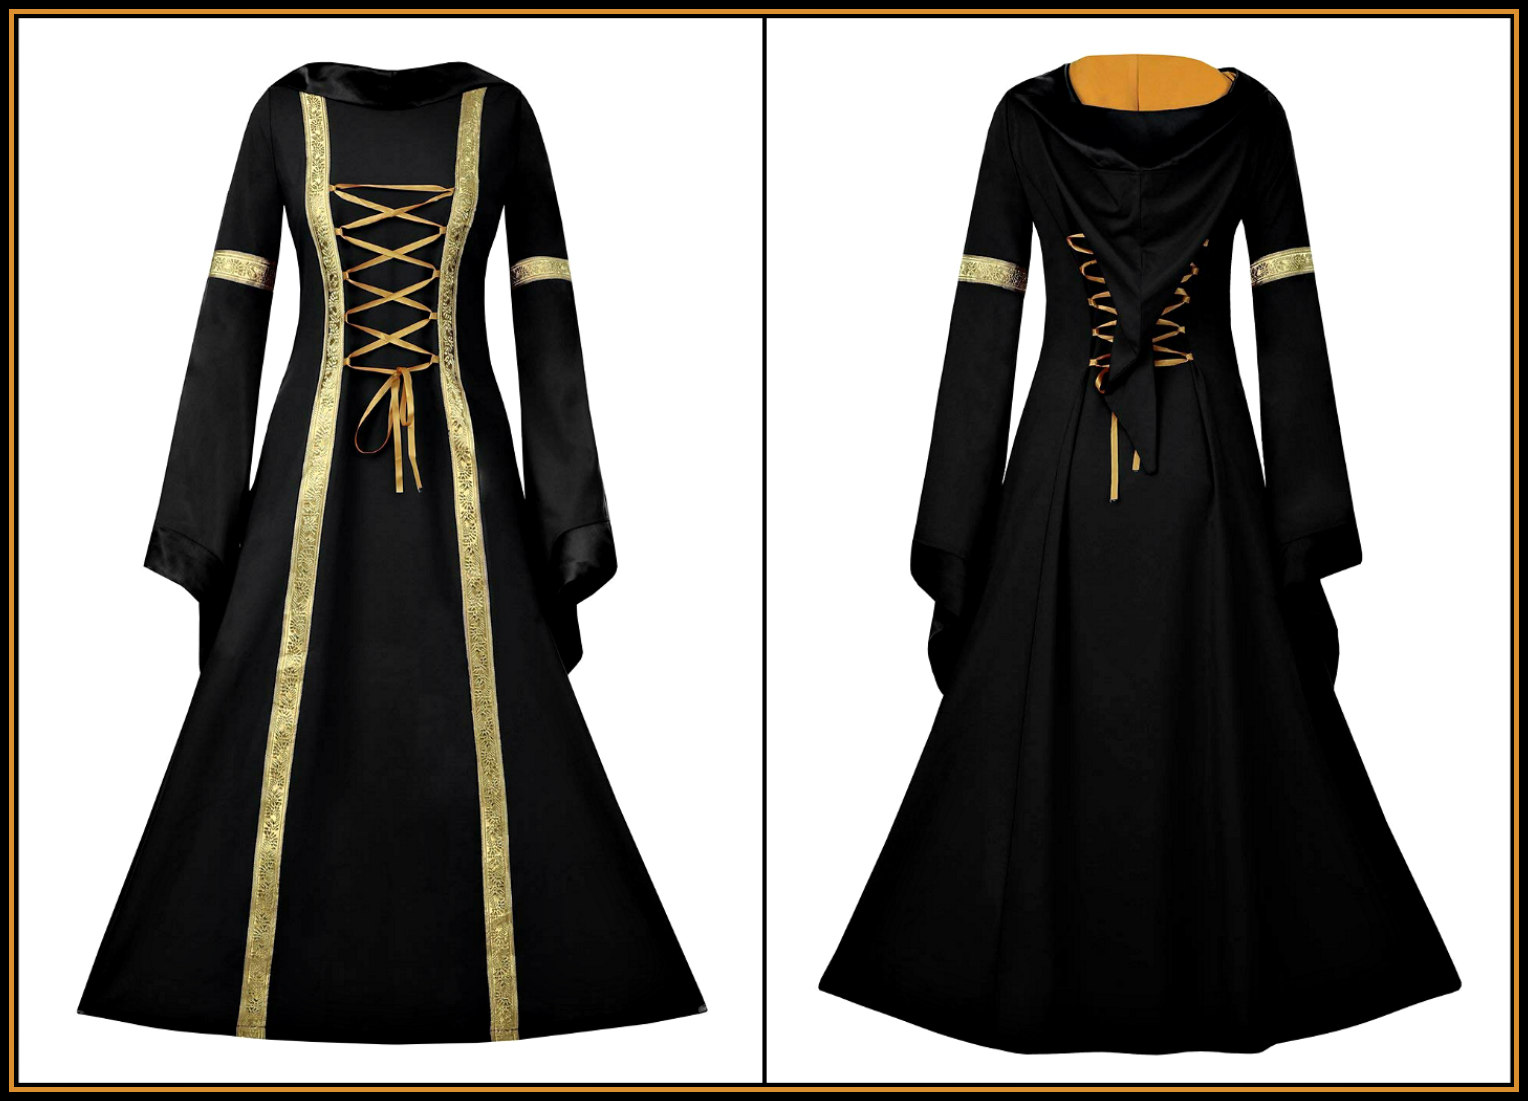 Medieval Women's Celtic Trim Black Hooded Travel Dress - DeluxeAdultCostumes.com